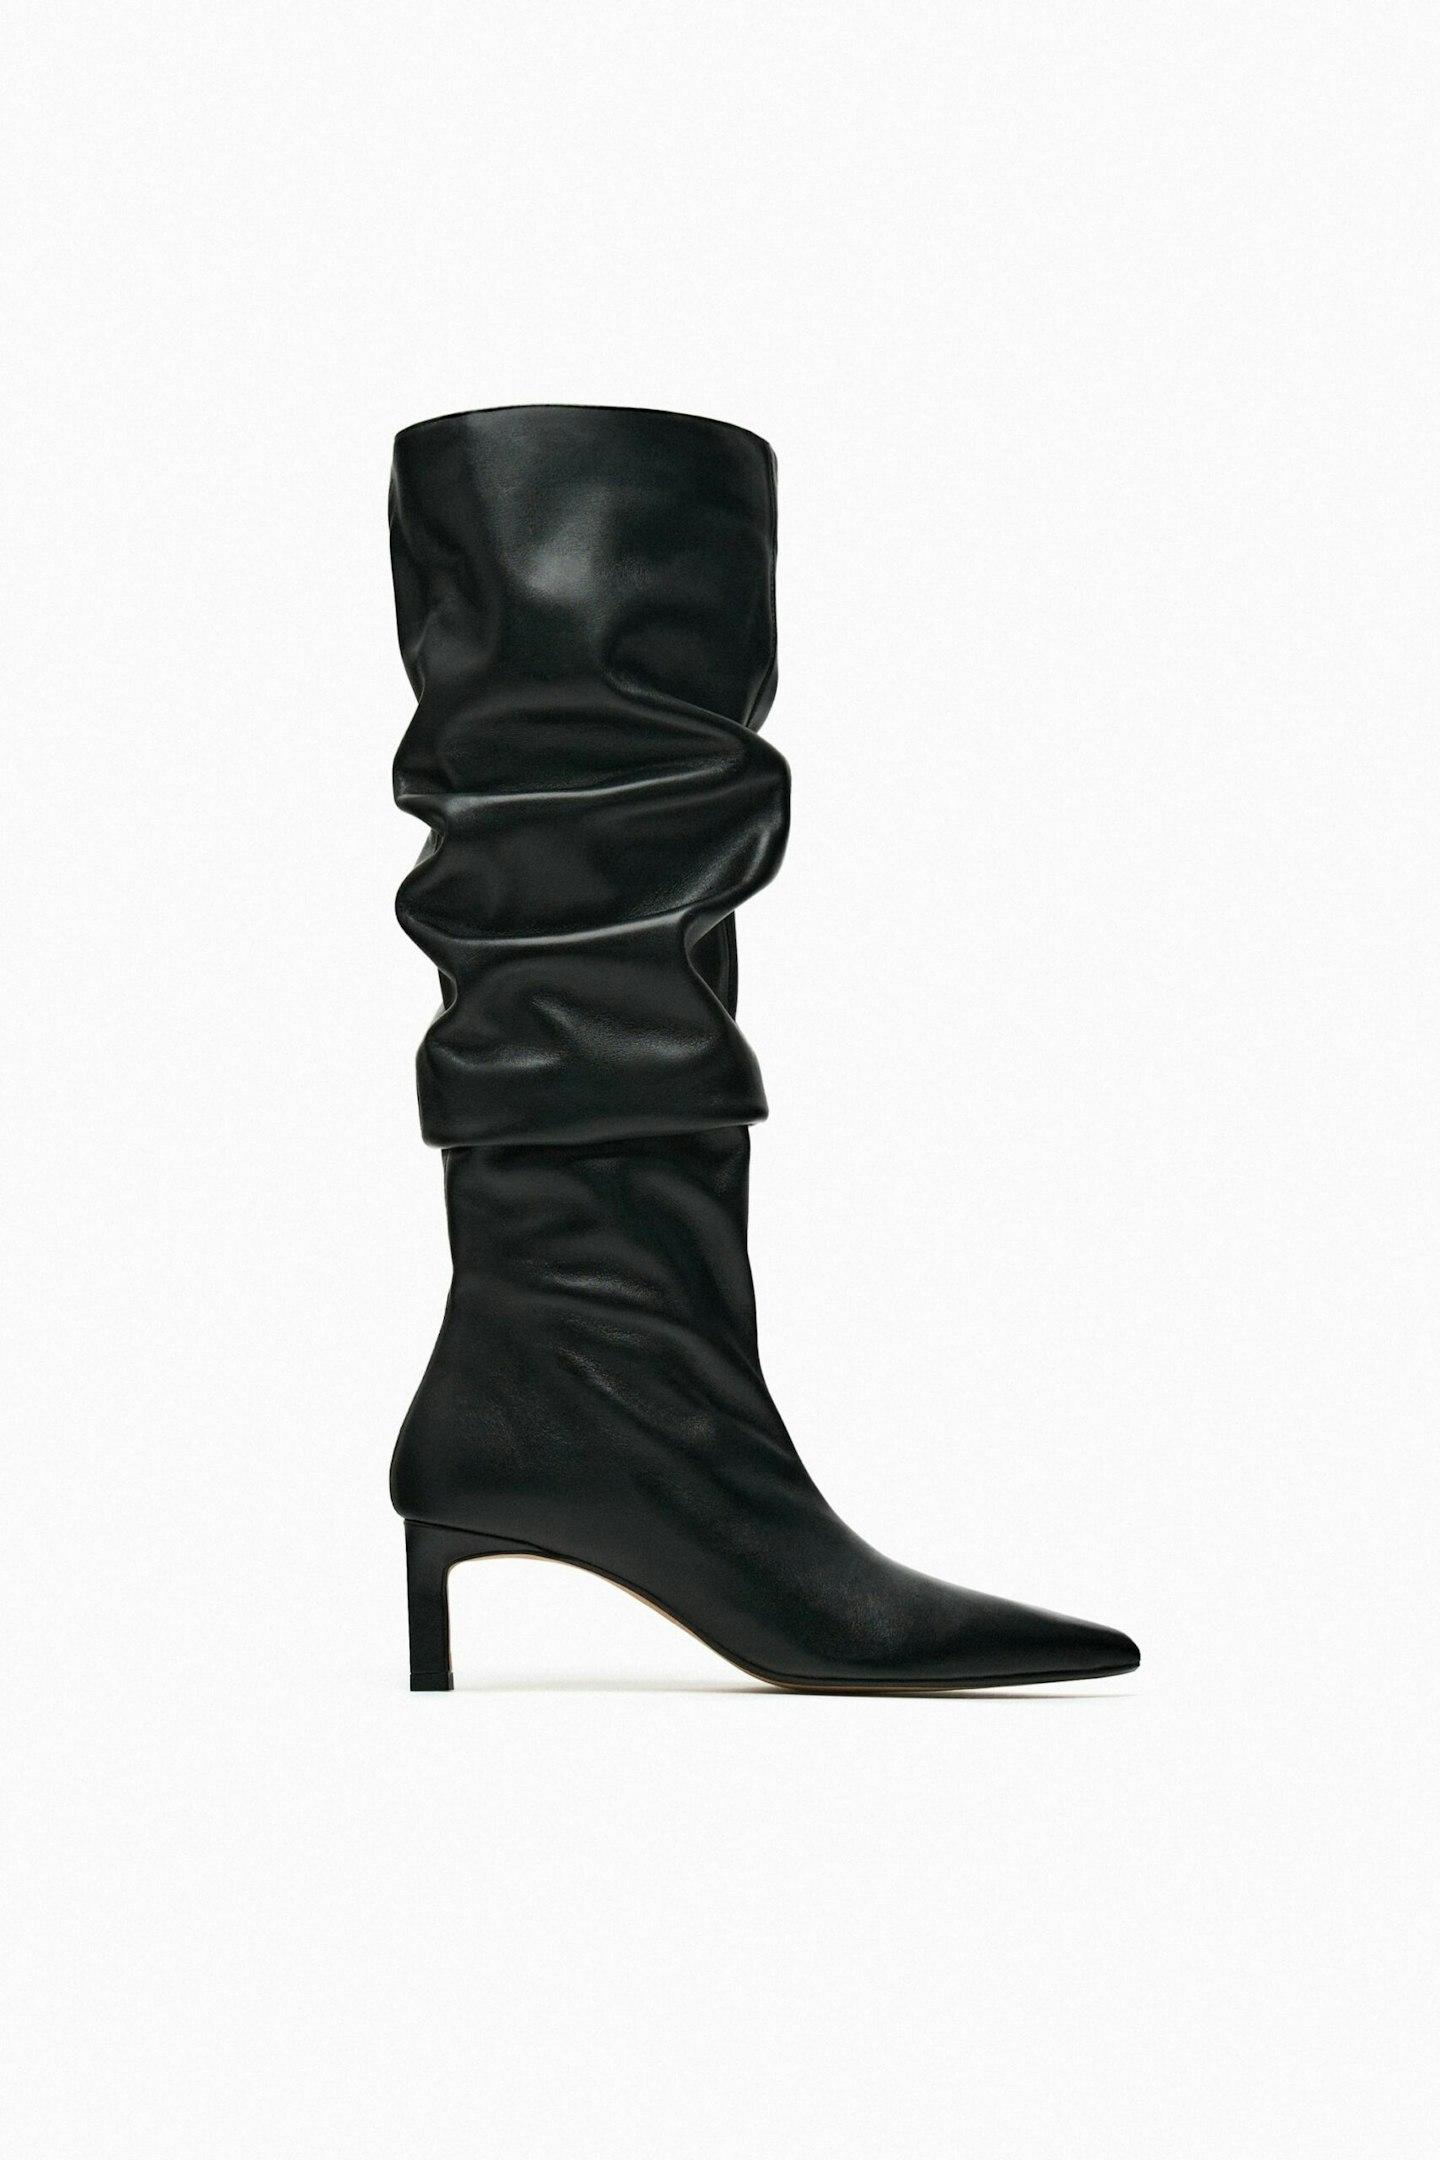 10 Ways to Style Your Knee-High Boots That Scream Fall 2023